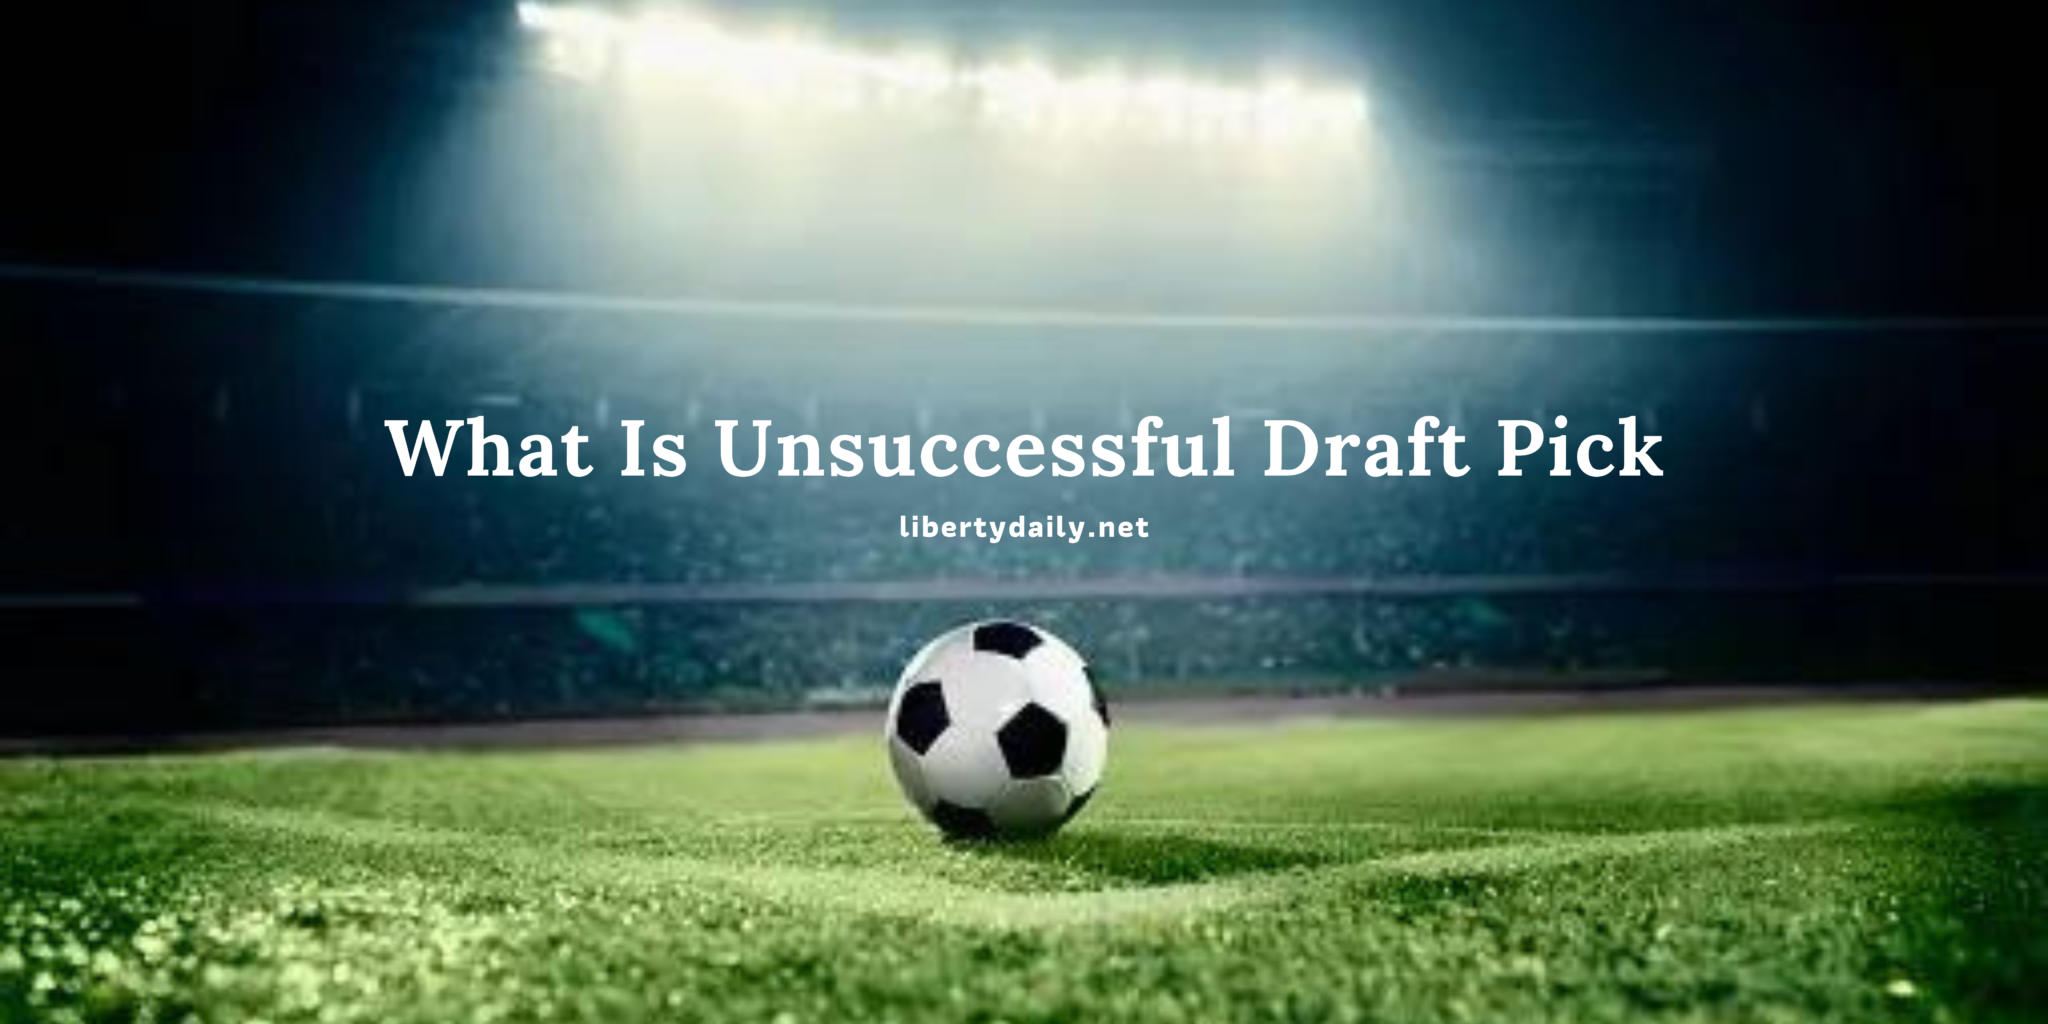 Unsuccessful Draft Pick: Everything You Need To Know